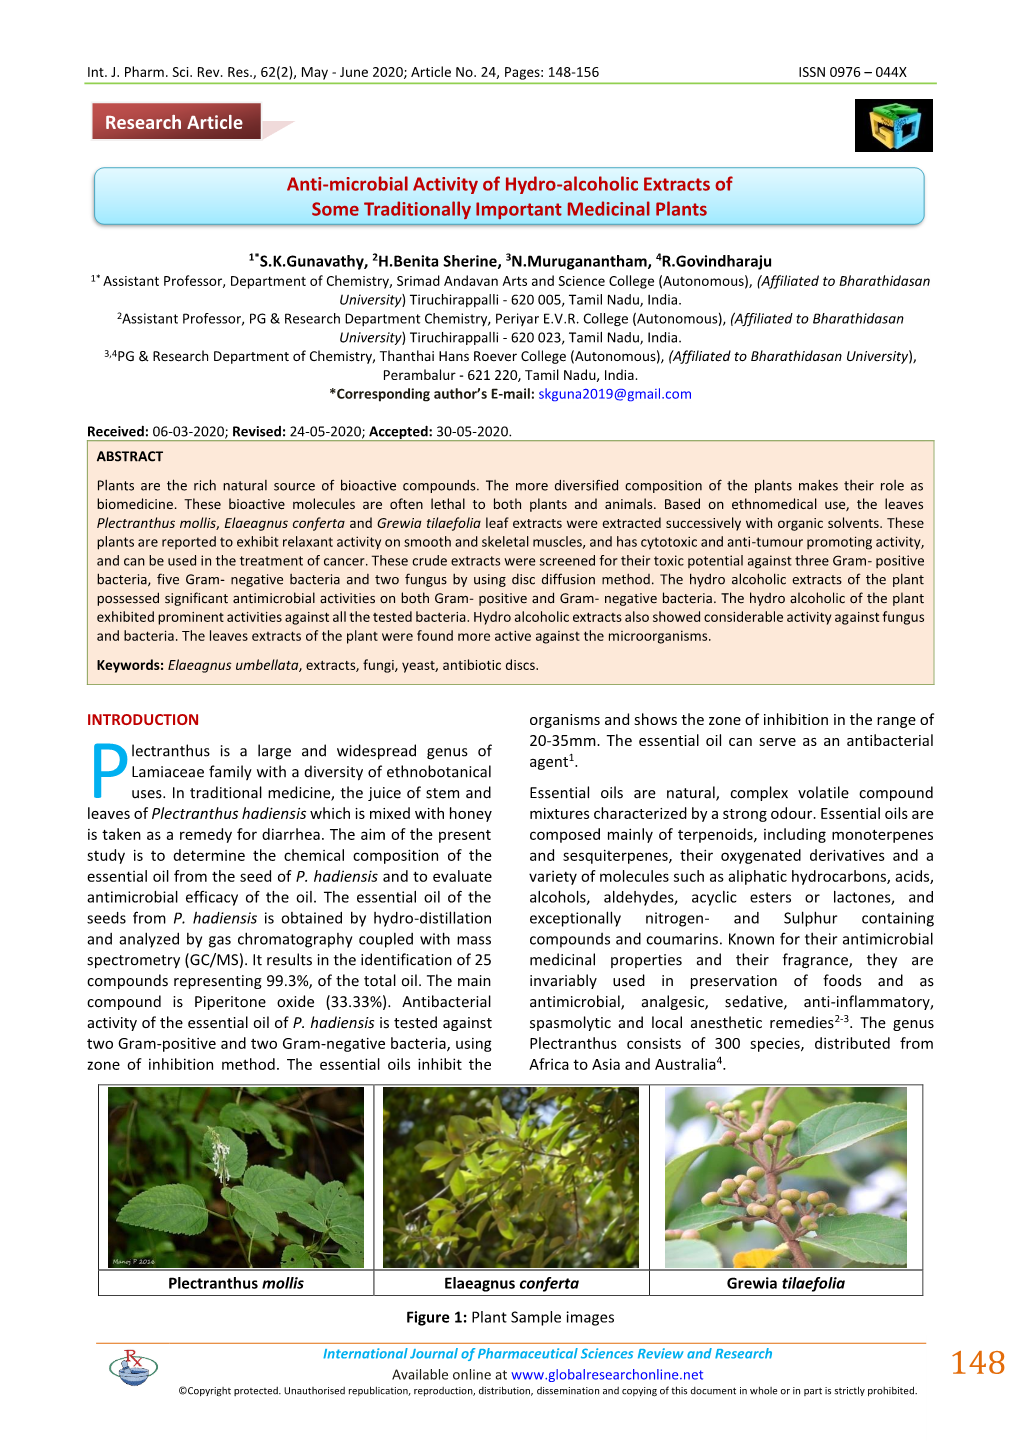 Anti-Microbial Activity of Hydro-Alcoholic Extracts of Some Traditionally Important Medicinal Plants Research Article